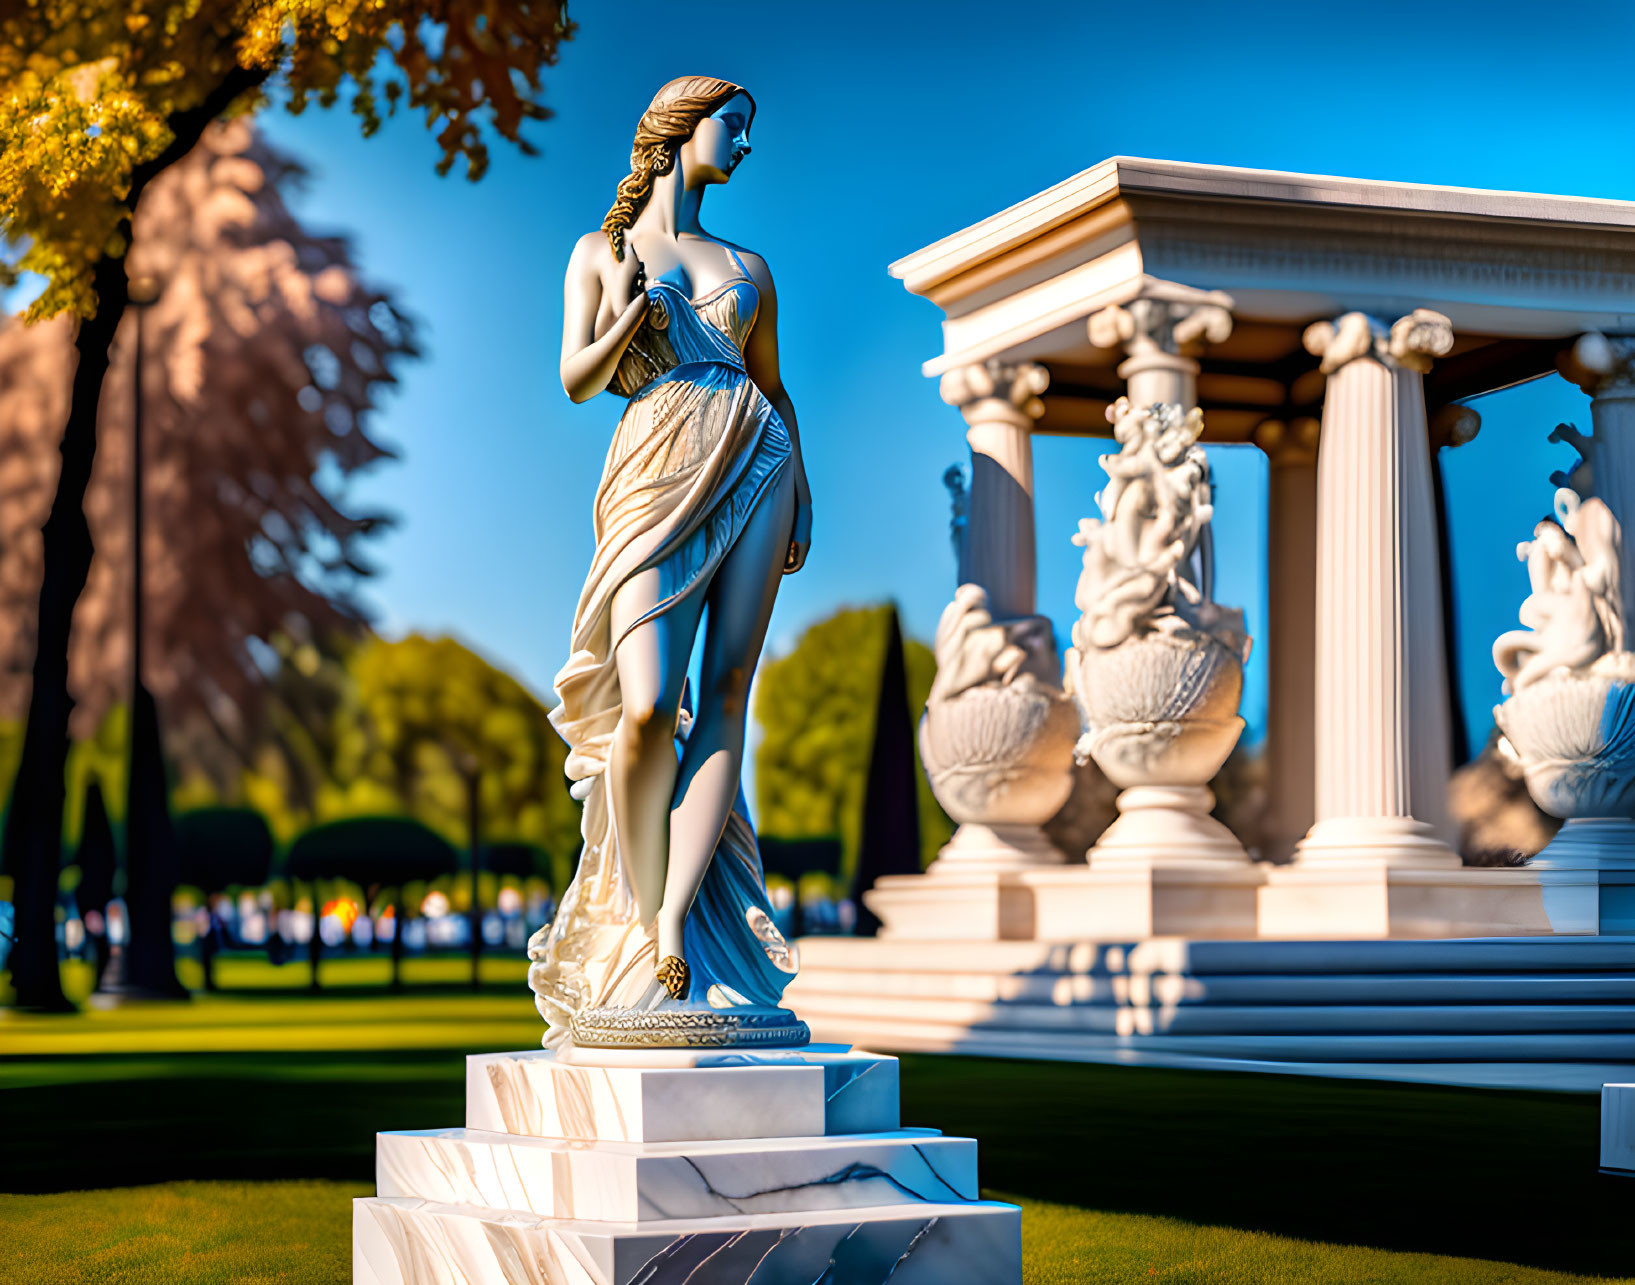 Classical statue of a woman in park with trees and gazebo under blue sky